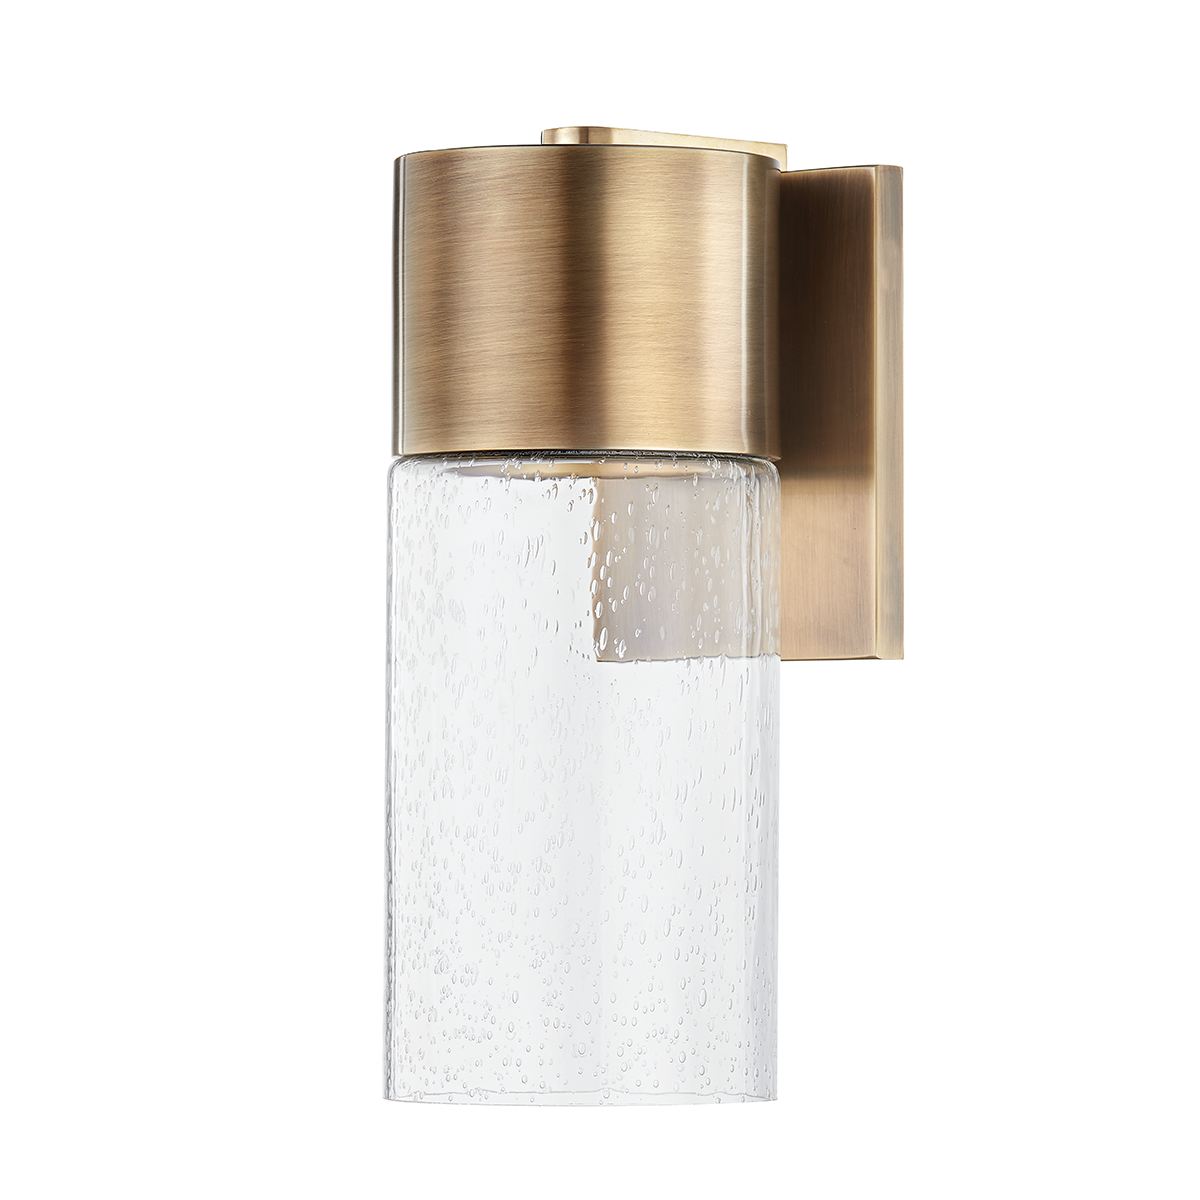 Troy PRISTINE 1 LIGHT LARGE EXTERIOR WALL SCONCE B5117 Outdoor l Wall Troy Lighting PATINA BRASS  